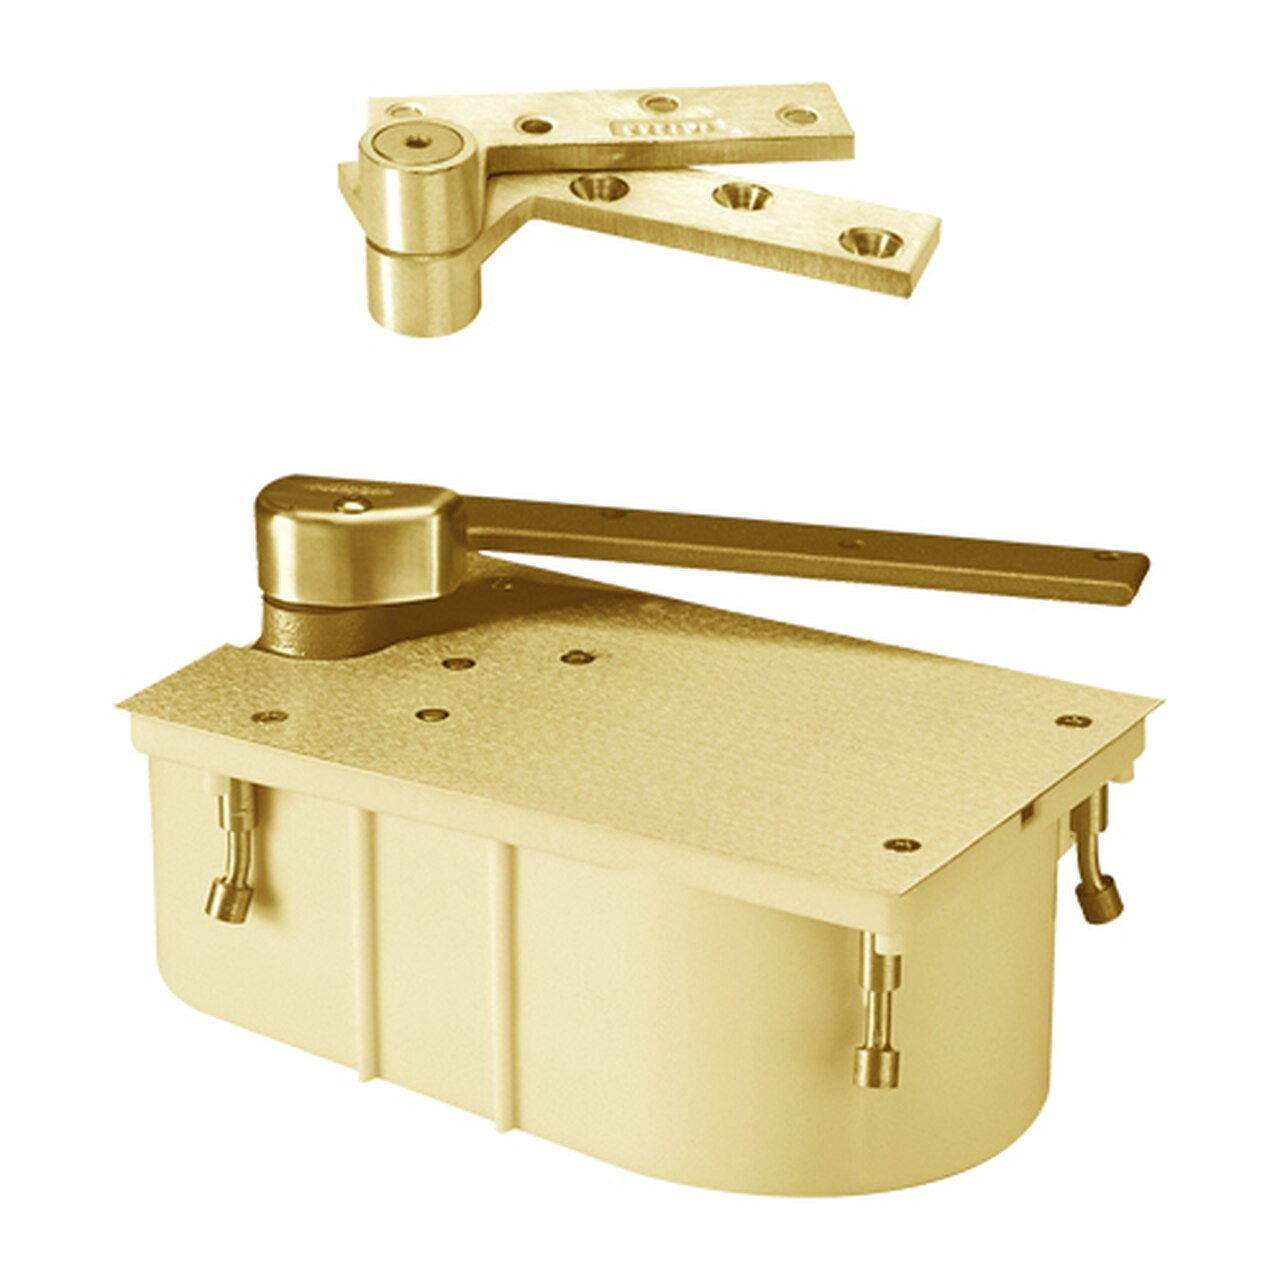 F27-105N-CWF-RH-605 Rixson 27 Series Fire Rated Heavy Duty 3/4" Offset Hung Floor Closer in Bright Brass Finish